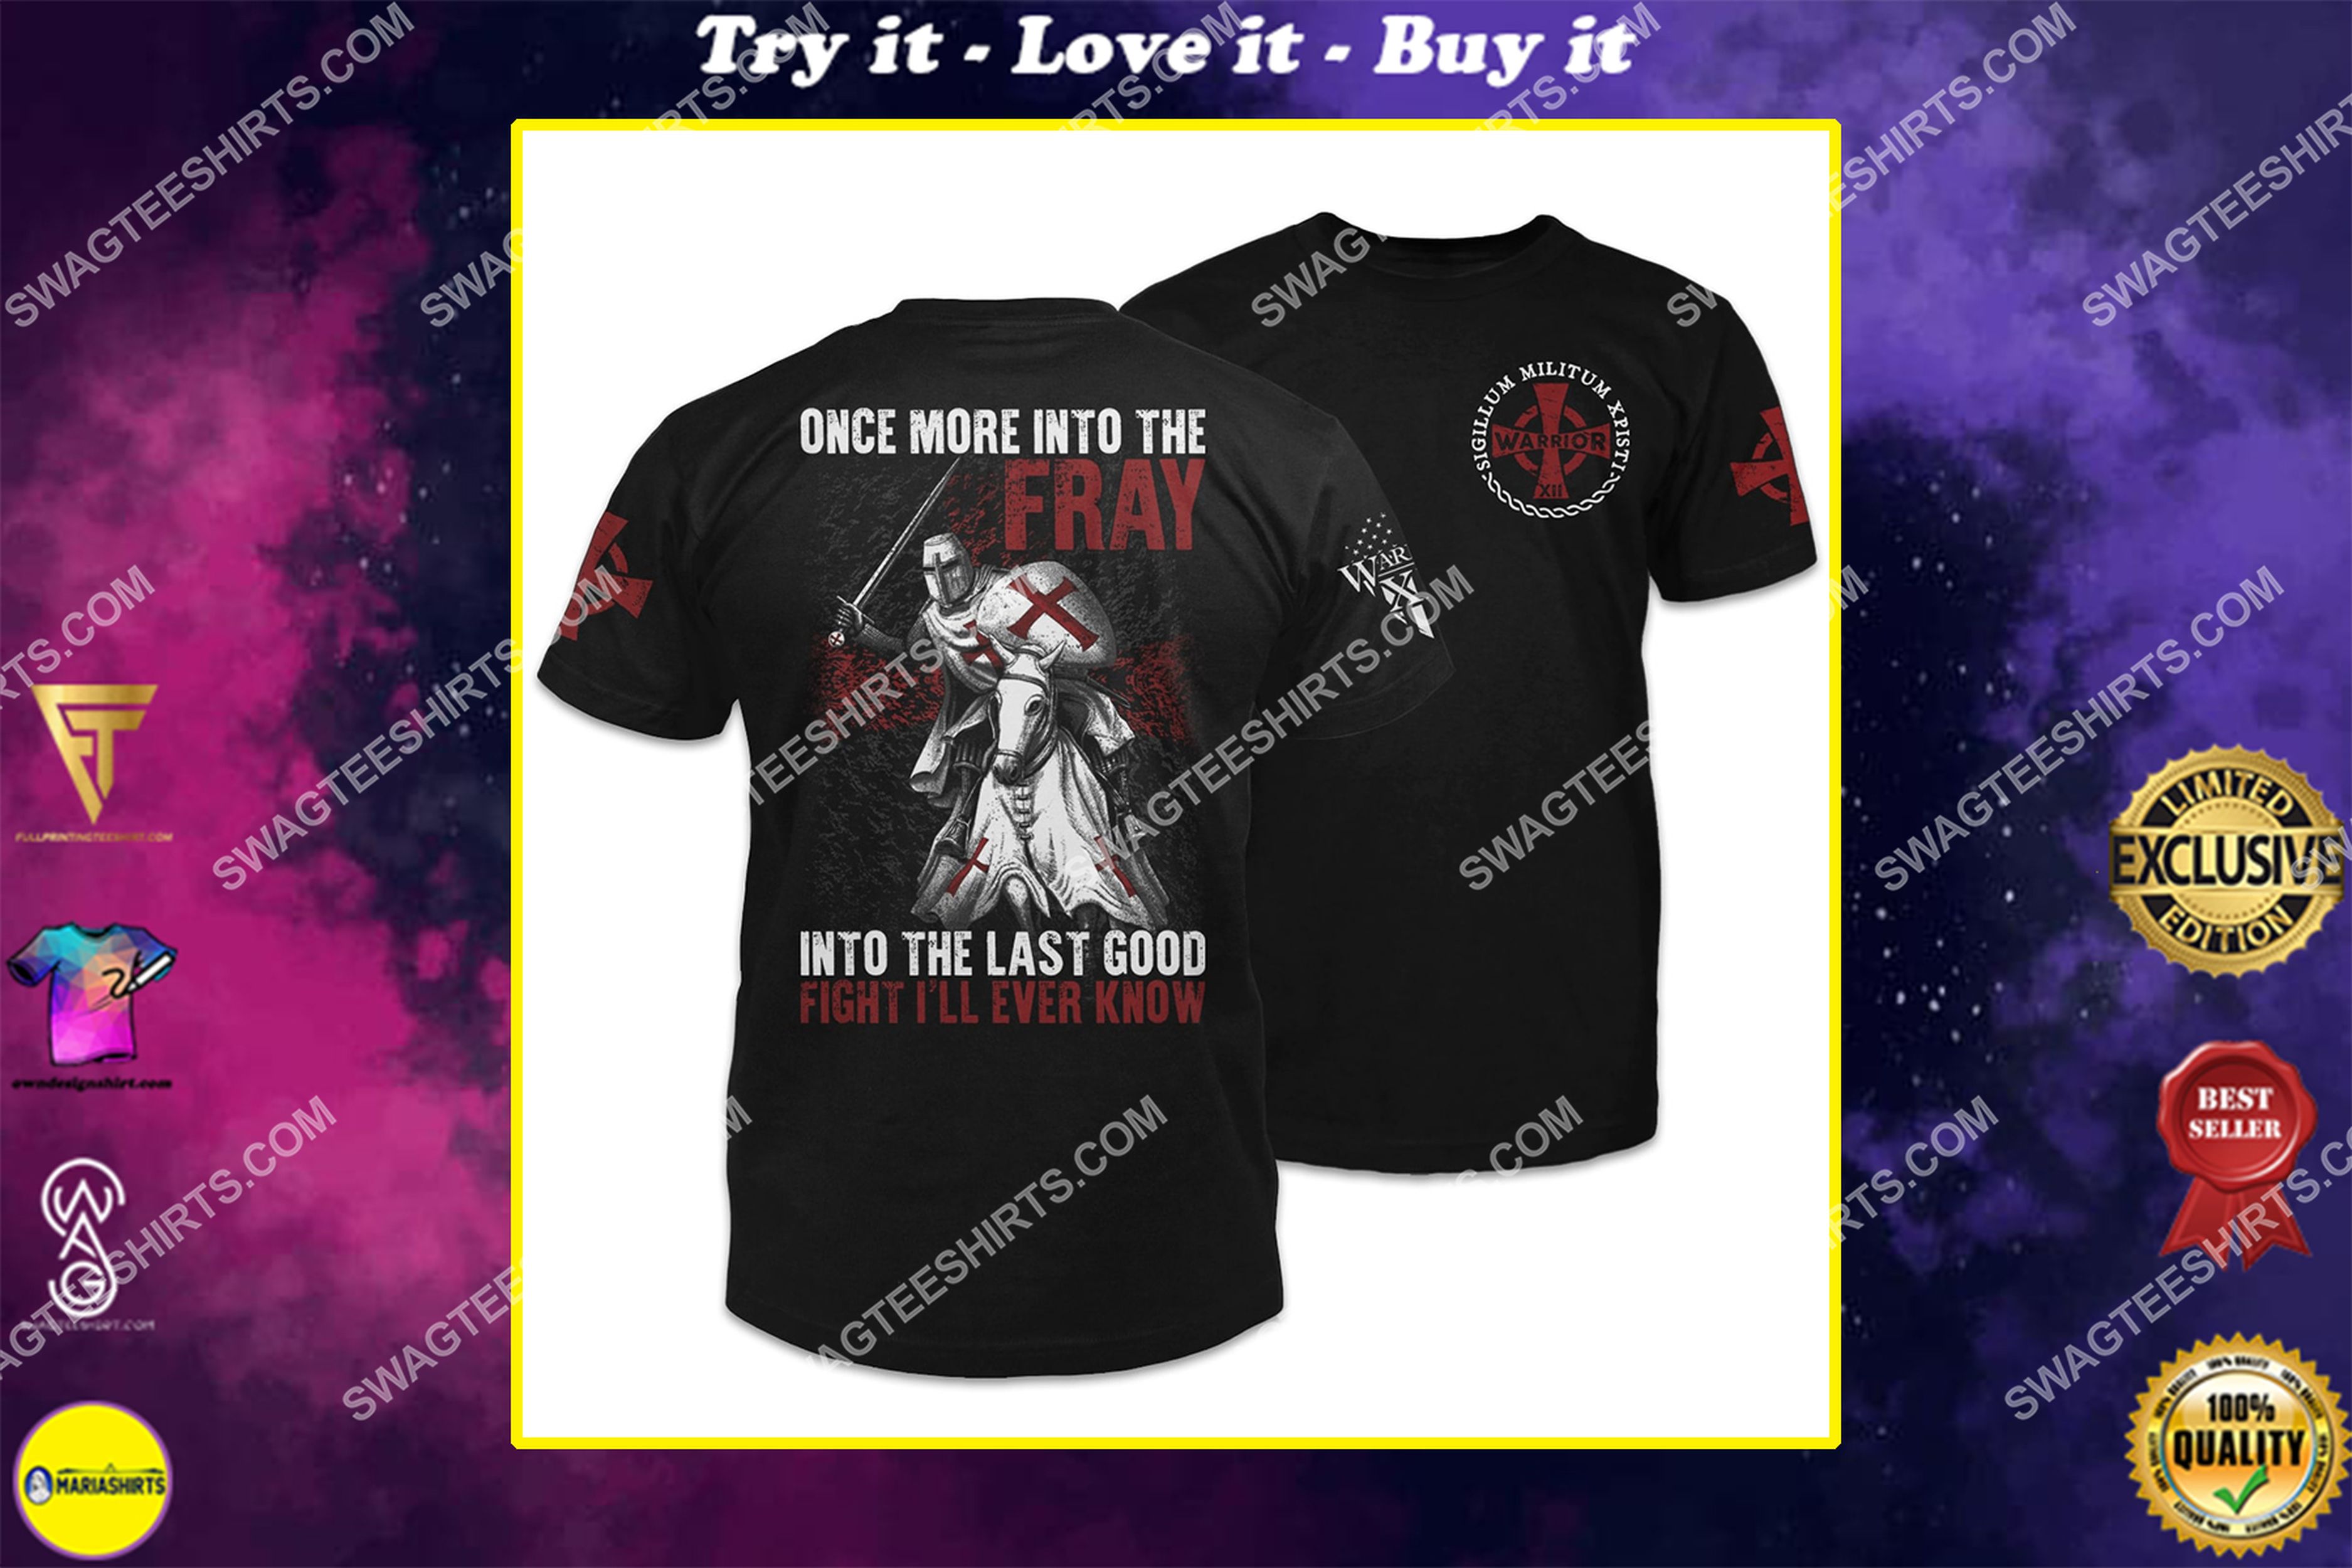 [special edition] knight templar one more into the fray into the last good fight i’ll ever know shirt – maria